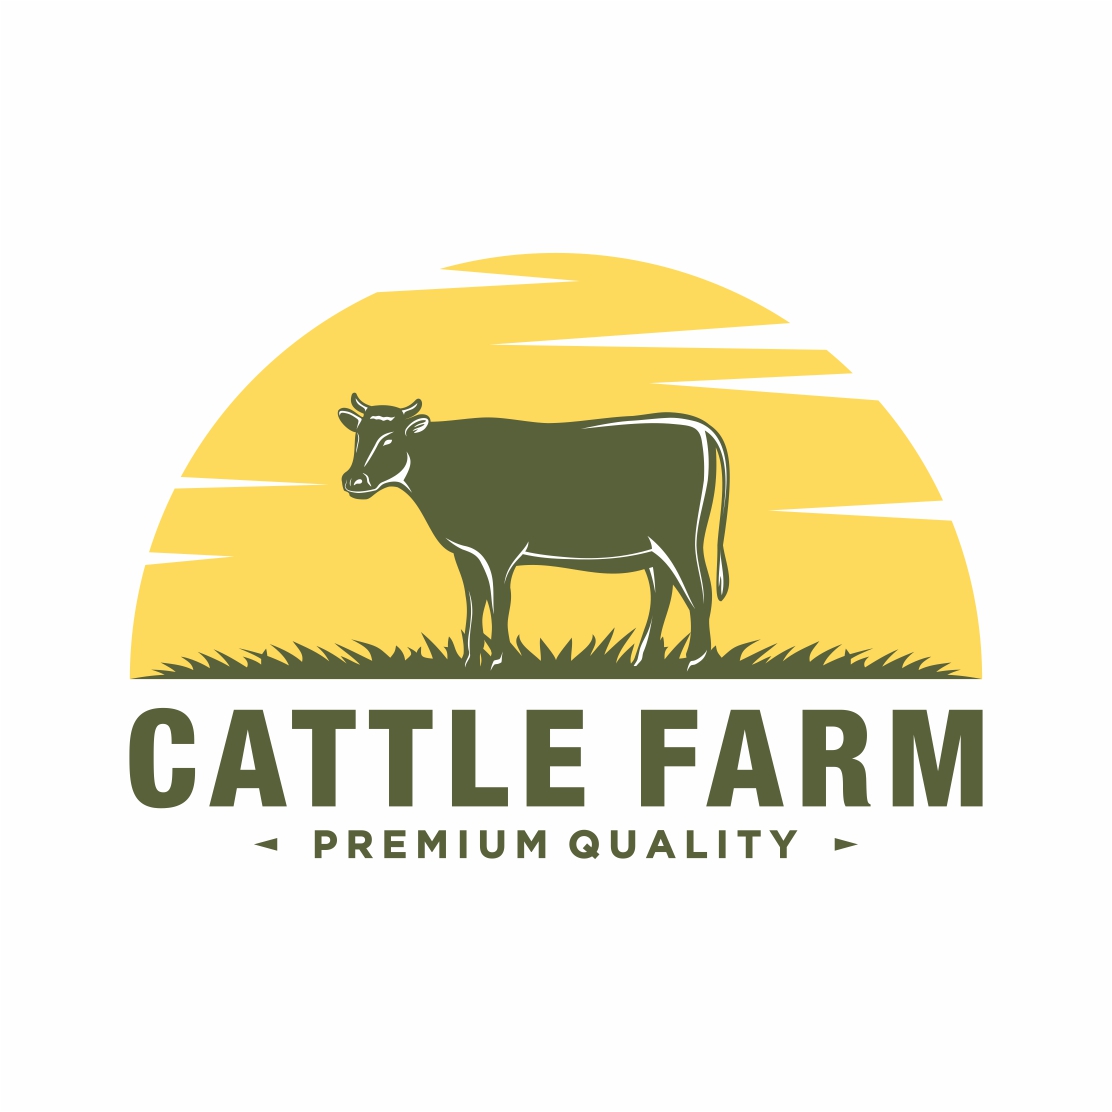 Cattle Farm logo design - only 5$ preview image.